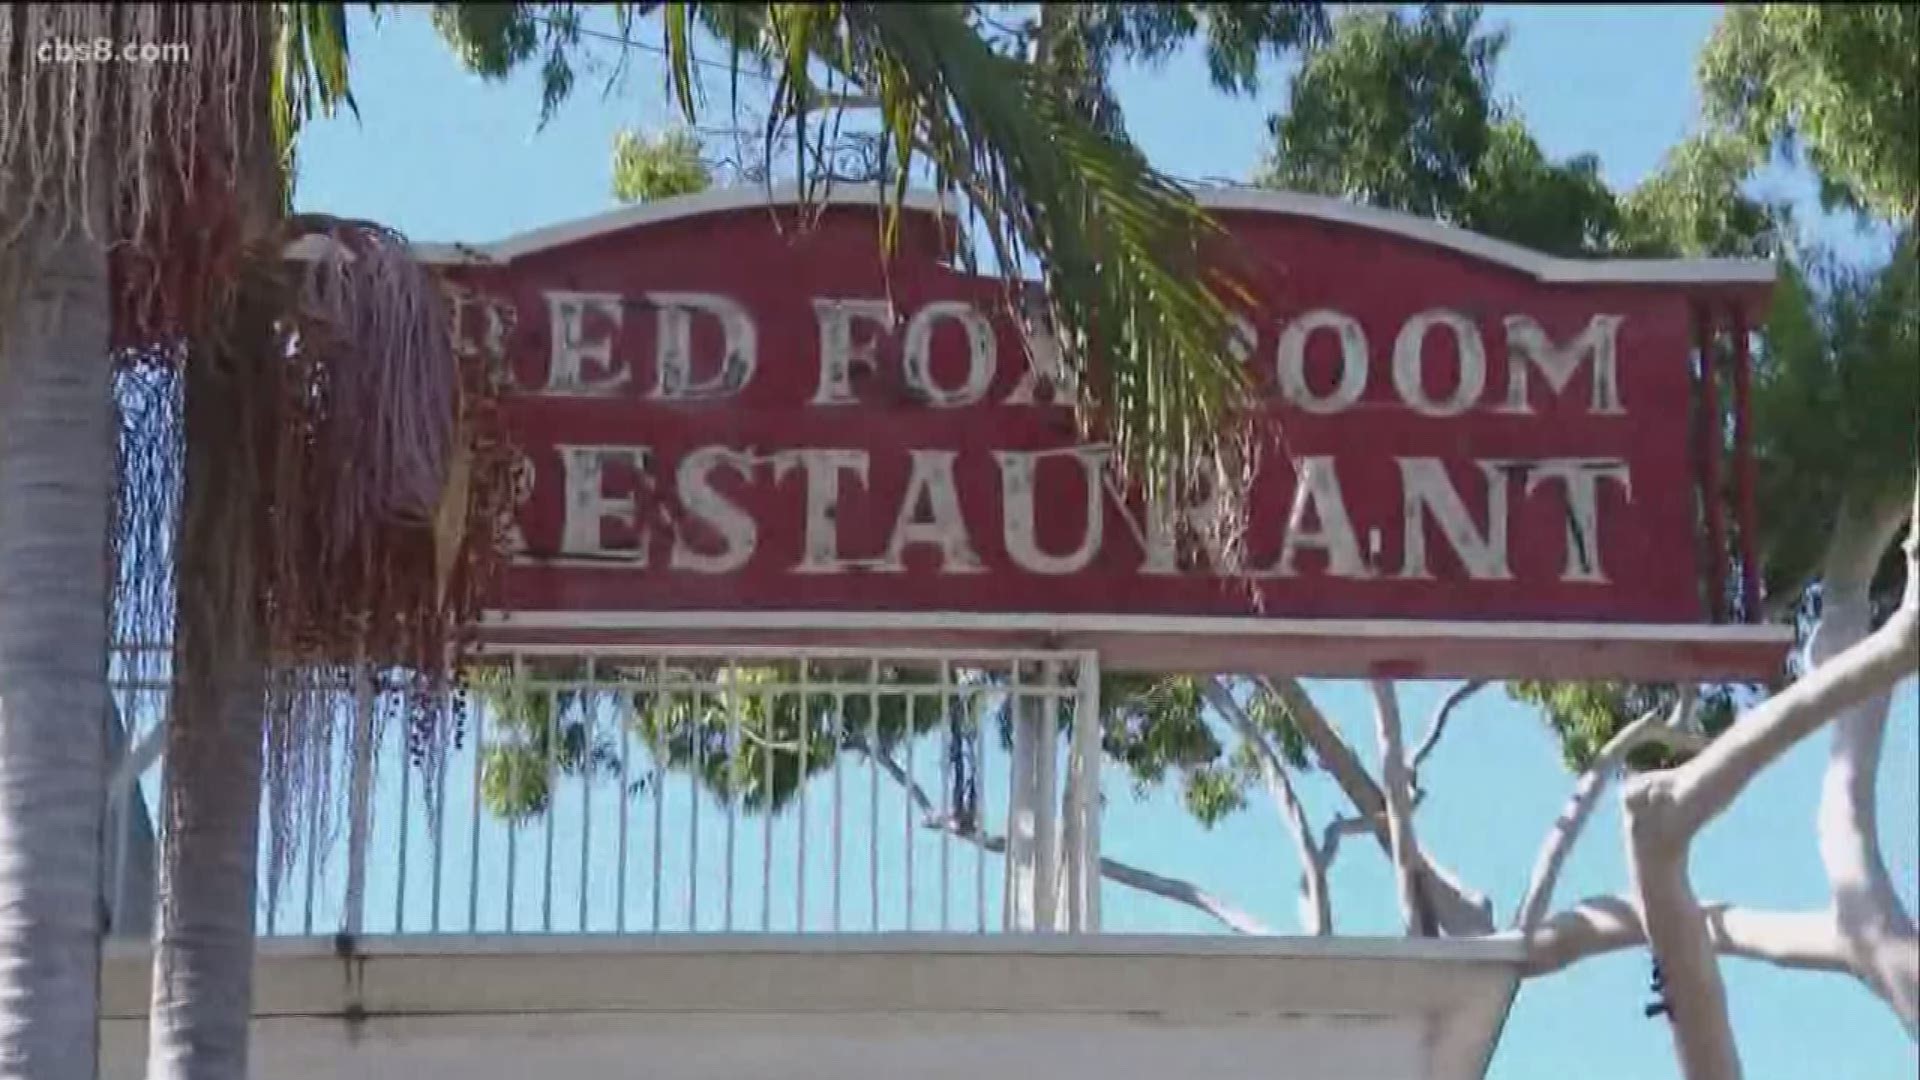 A legendary old school steakhouse that has been a part of San Diego’s restaurant scene for nearly 60 years is in its final days at its current location.